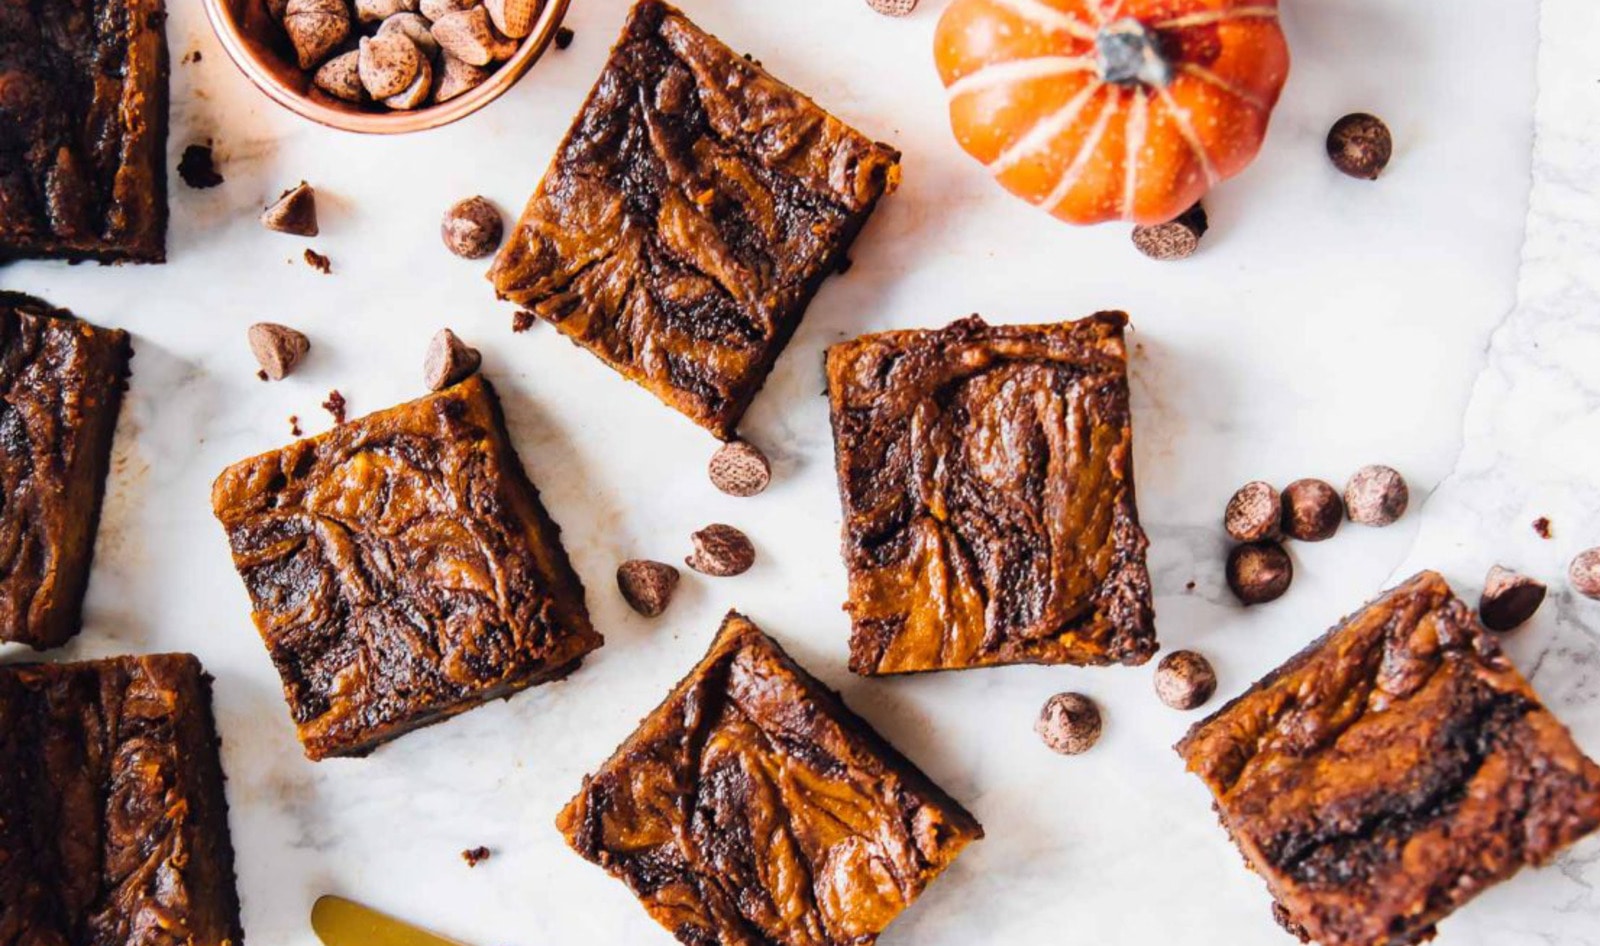 These 10 Fall-Time Vegan Dessert Recipes Are the Only Things I'm Making This Season